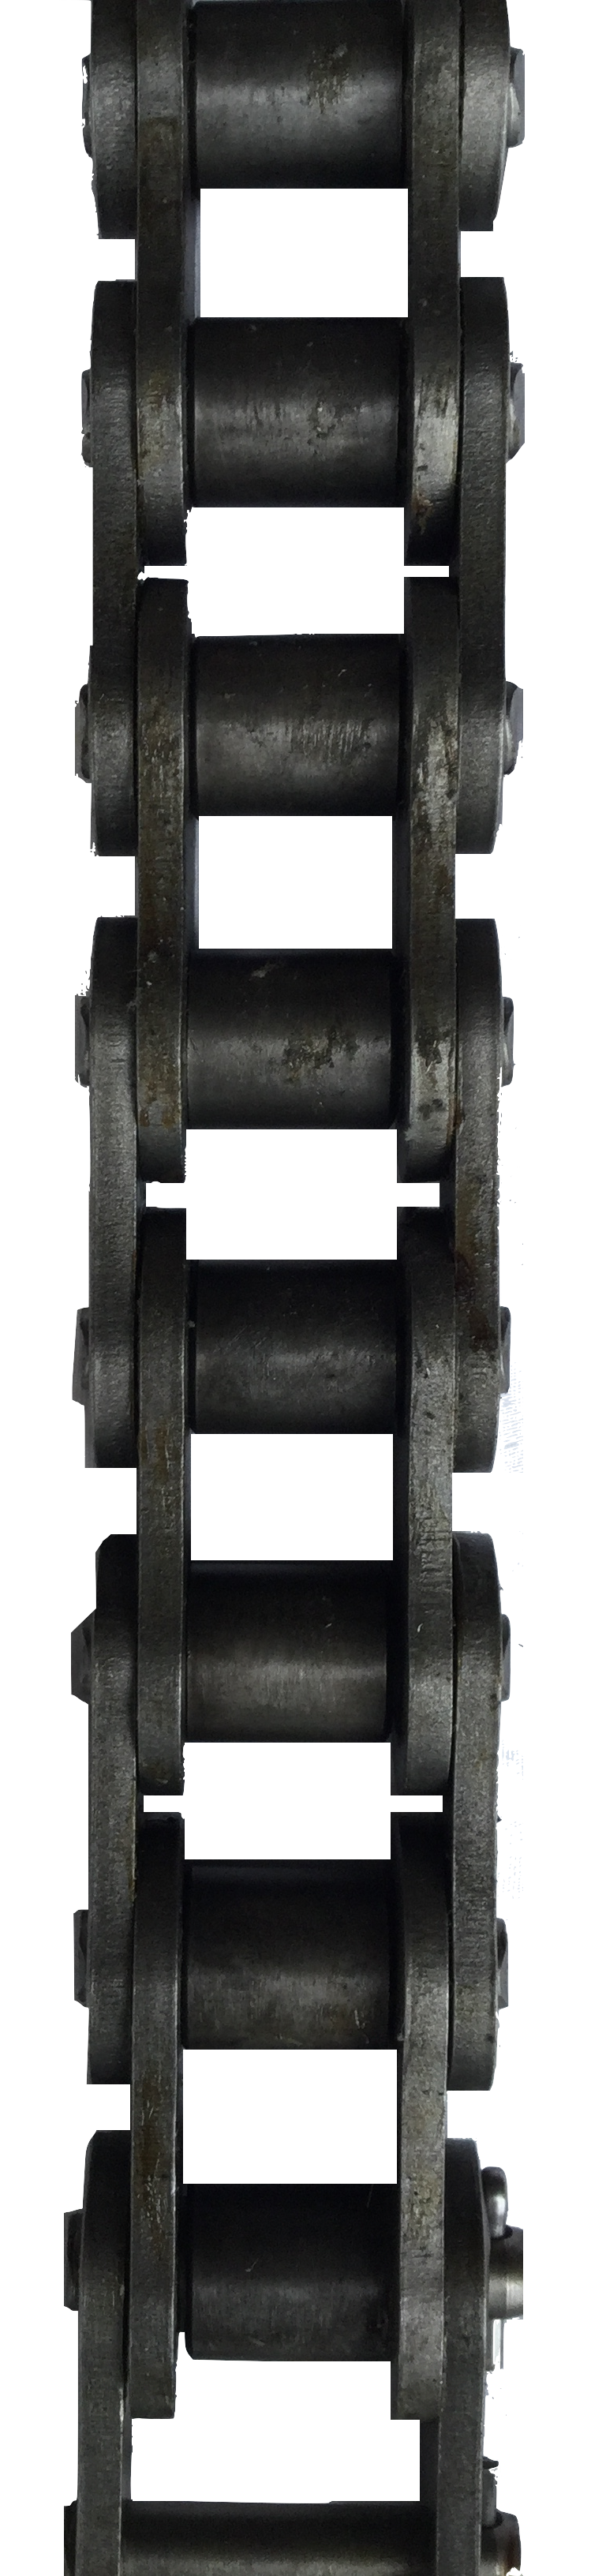 HKK #120H Heavy Riveted Roller Chain (1.500" Pitch) - SOLD BY THE FOOT - Froedge Machine & Supply Co., Inc.